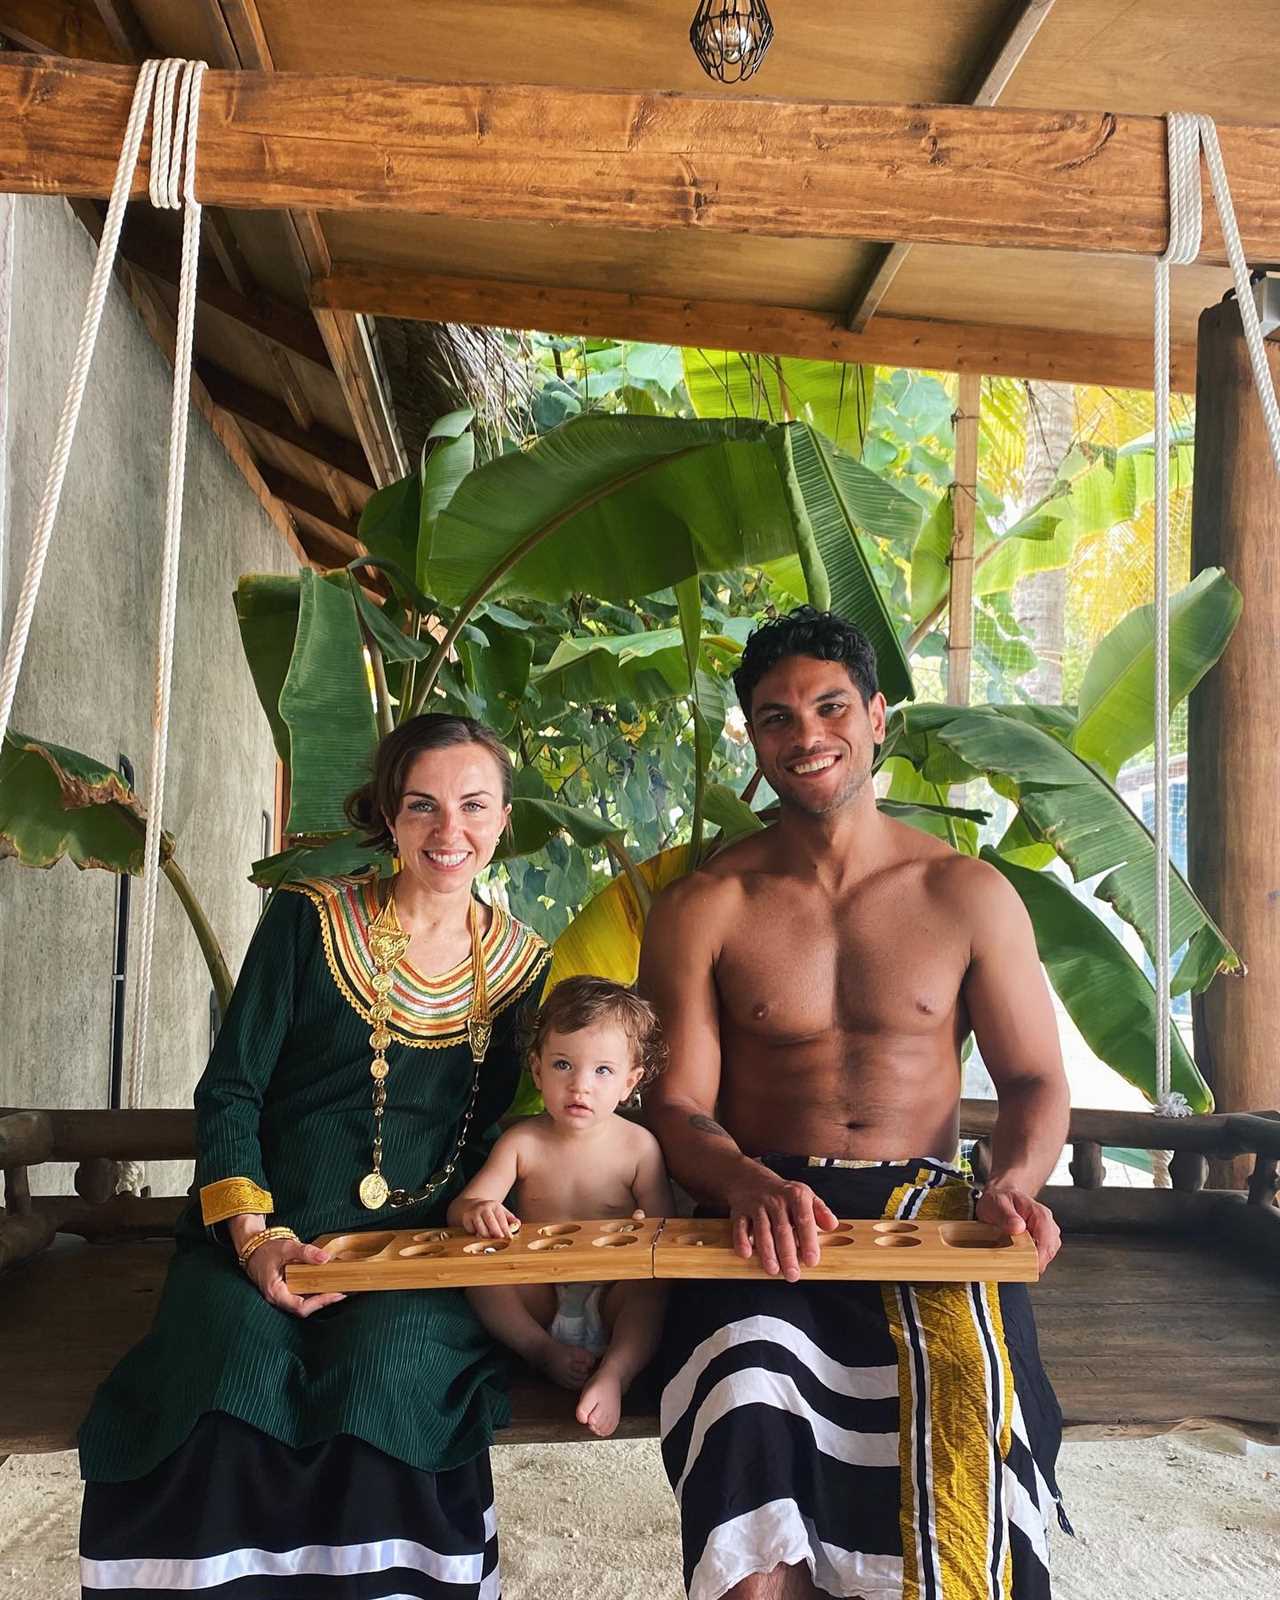 EastEnders’ Louisa Lytton looks incredible in a bikini alongside hunky husband and their baby in the Maldives